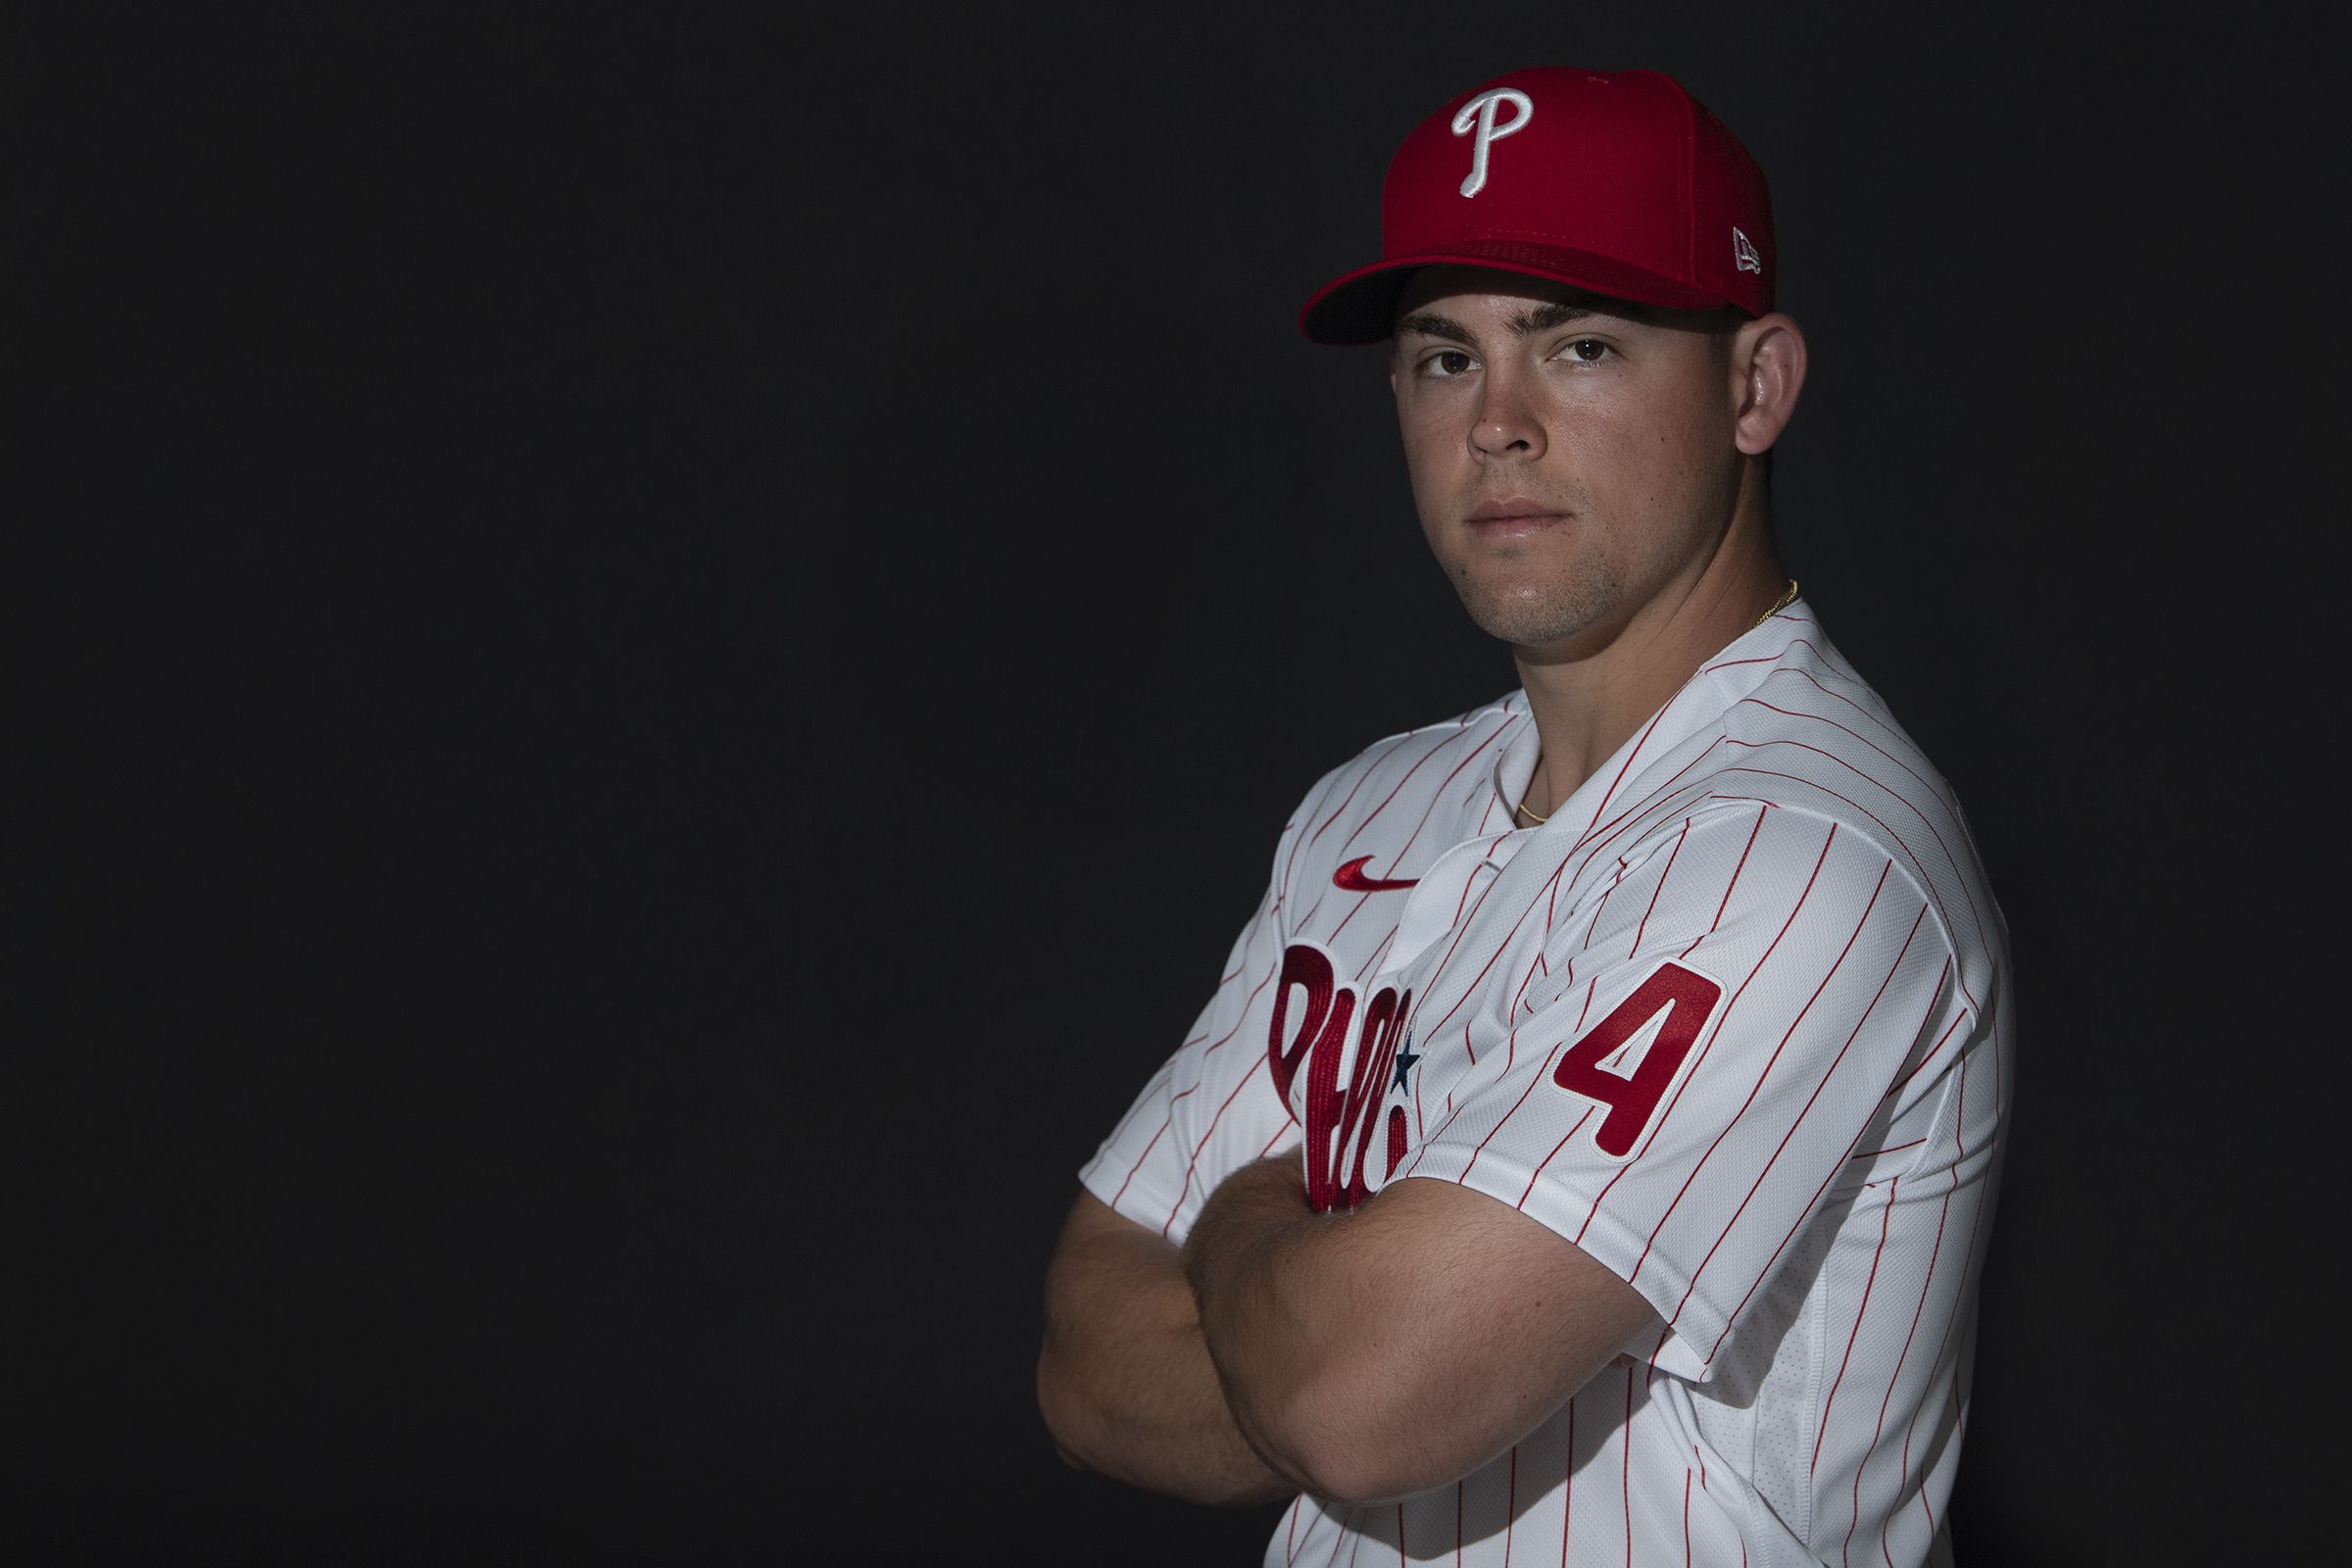 Scott Kingery found his way and rewarded the club's faith in him